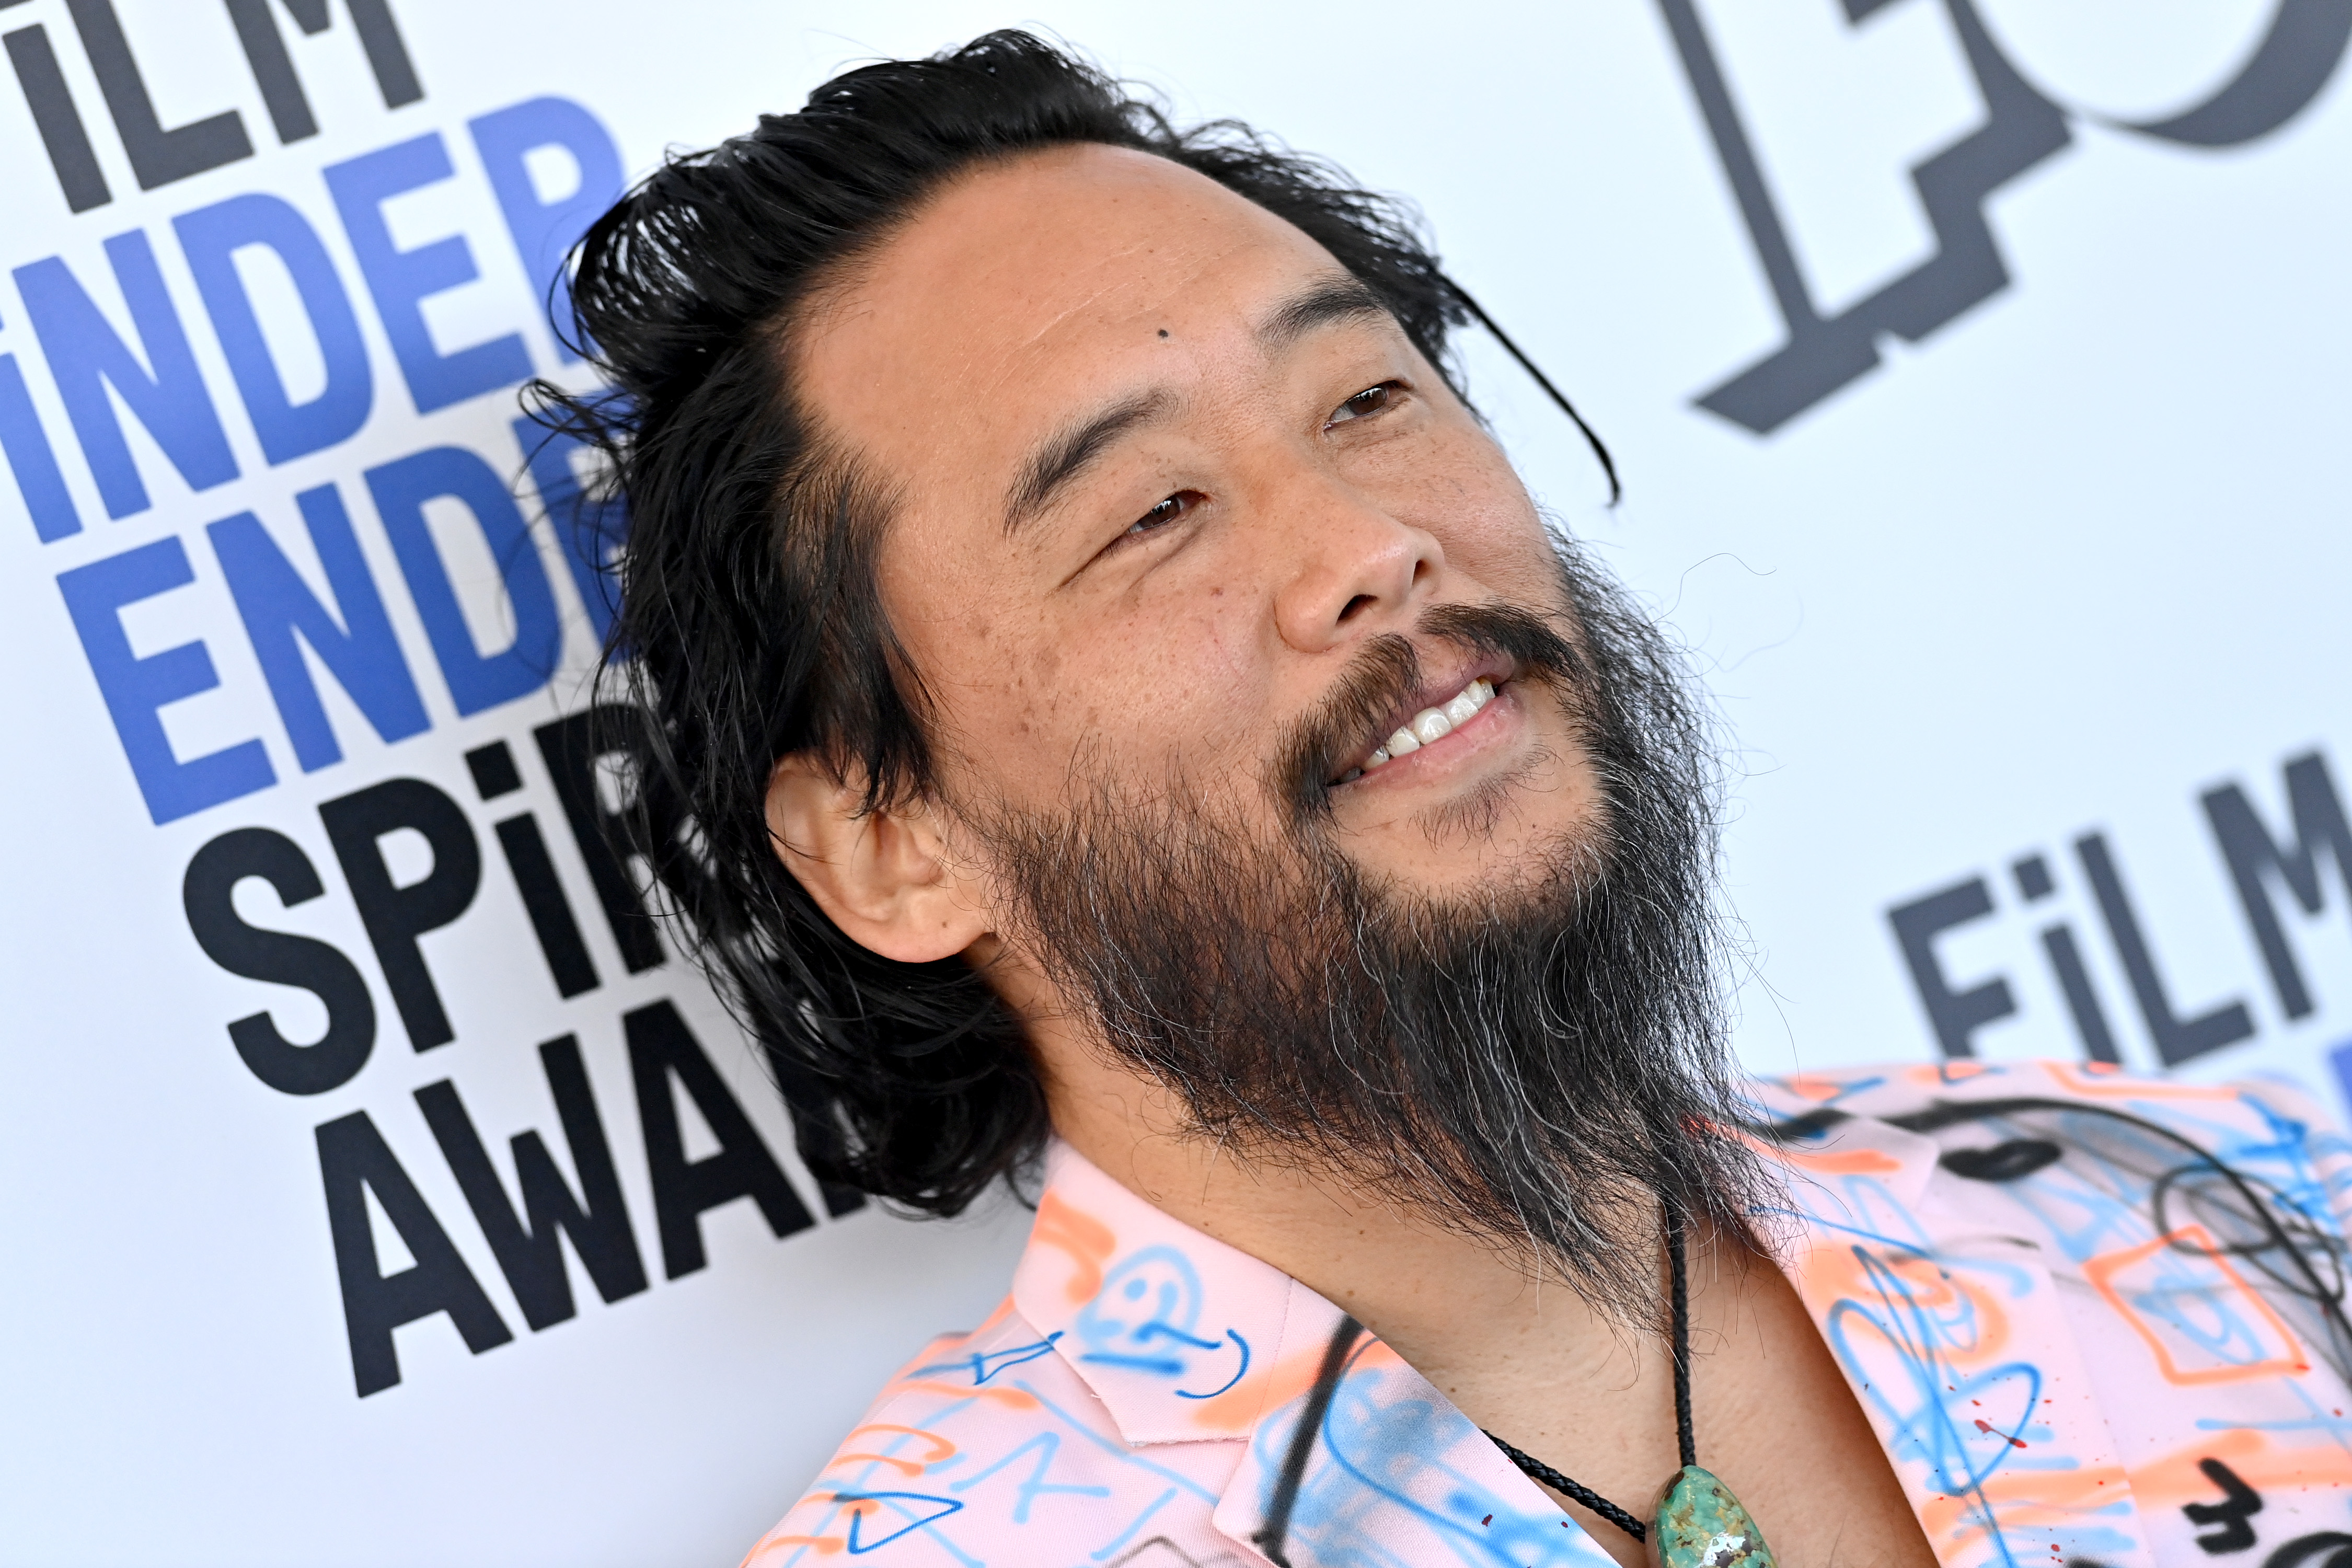 David Choe at the Film Independent Spirit Awards in 2022, in Santa Monica, California. | Source: Getty Images